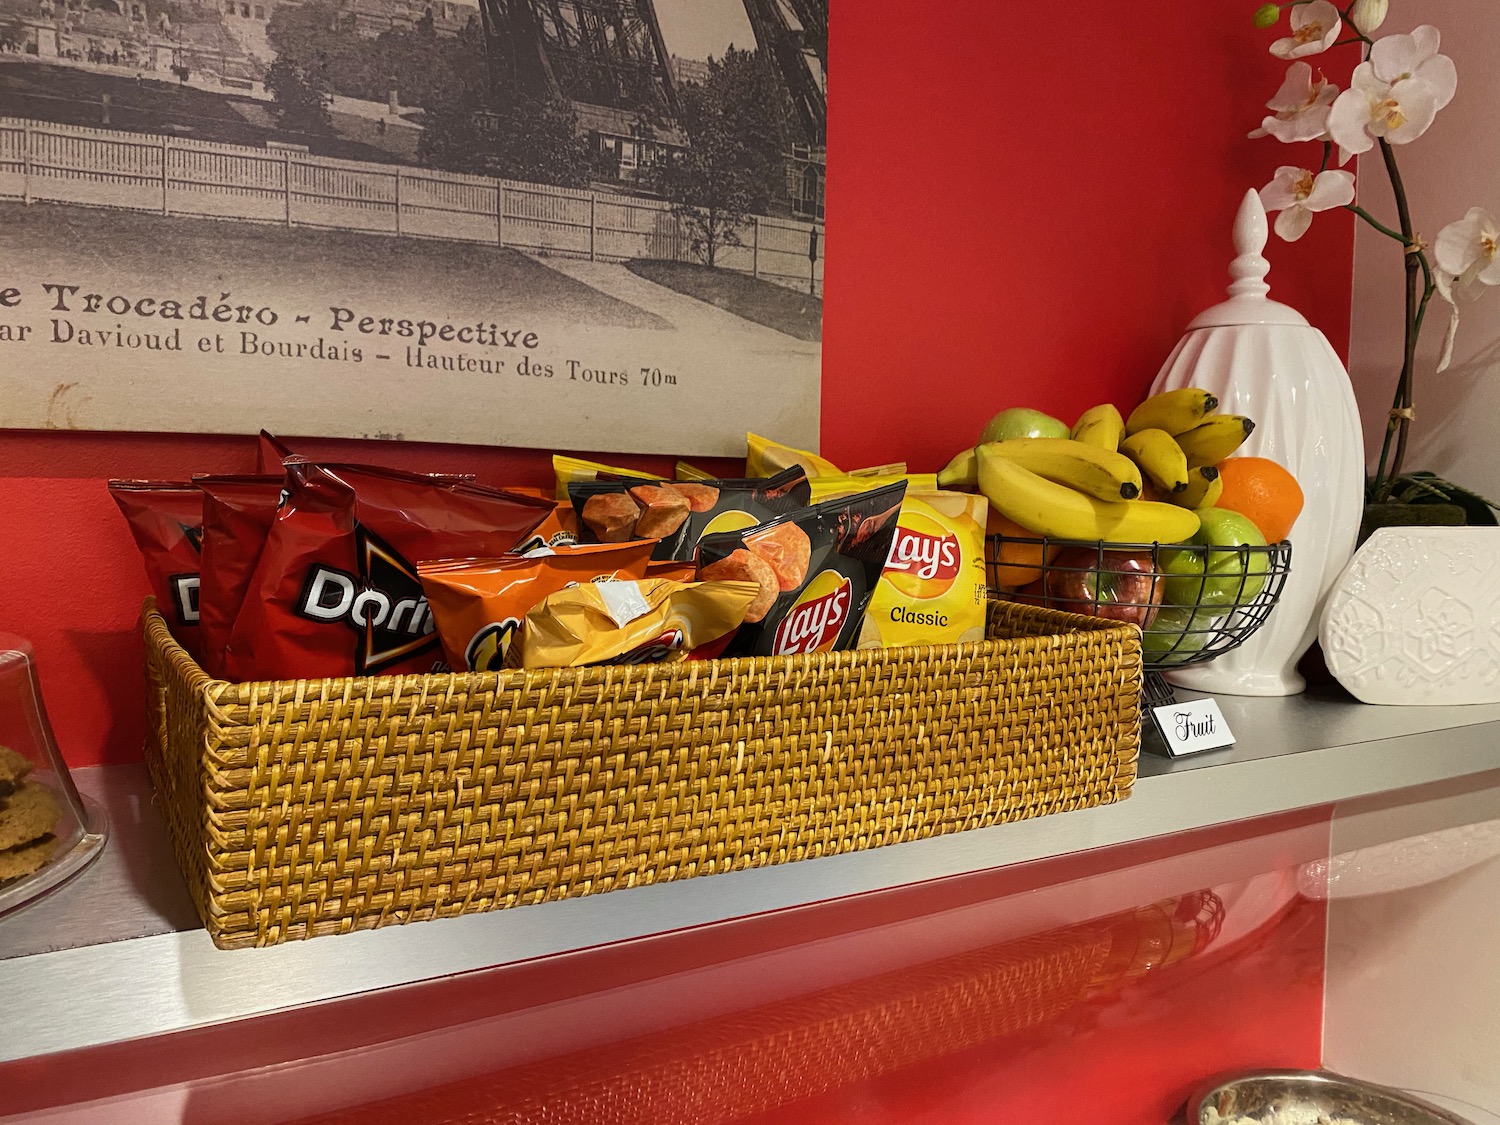 a basket of chips and fruit on a shelf